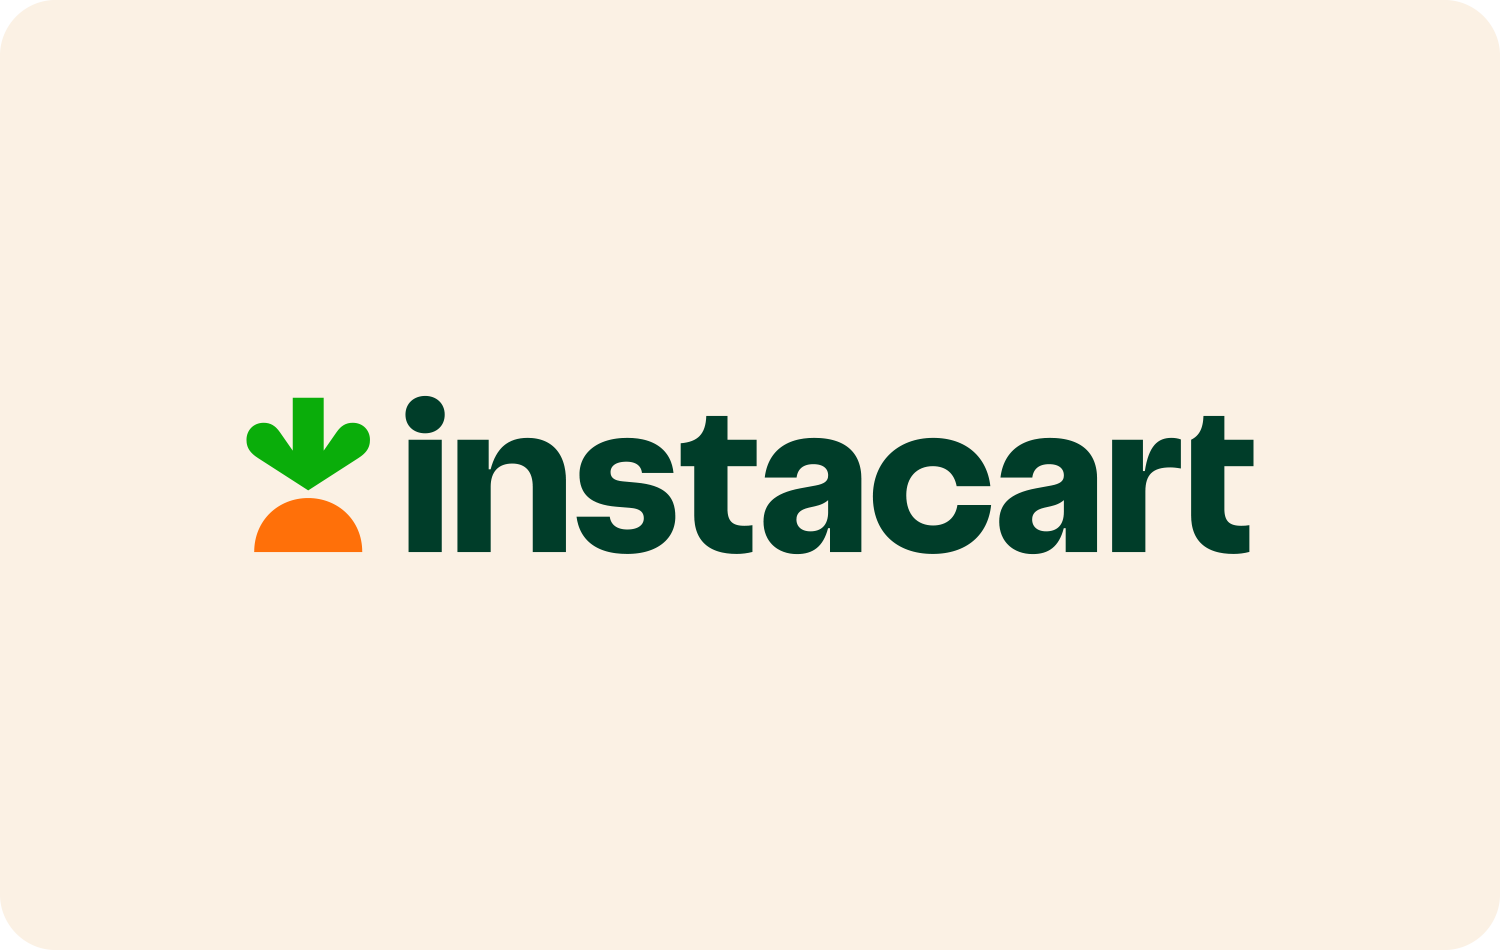 Instacart - For Aldi and others